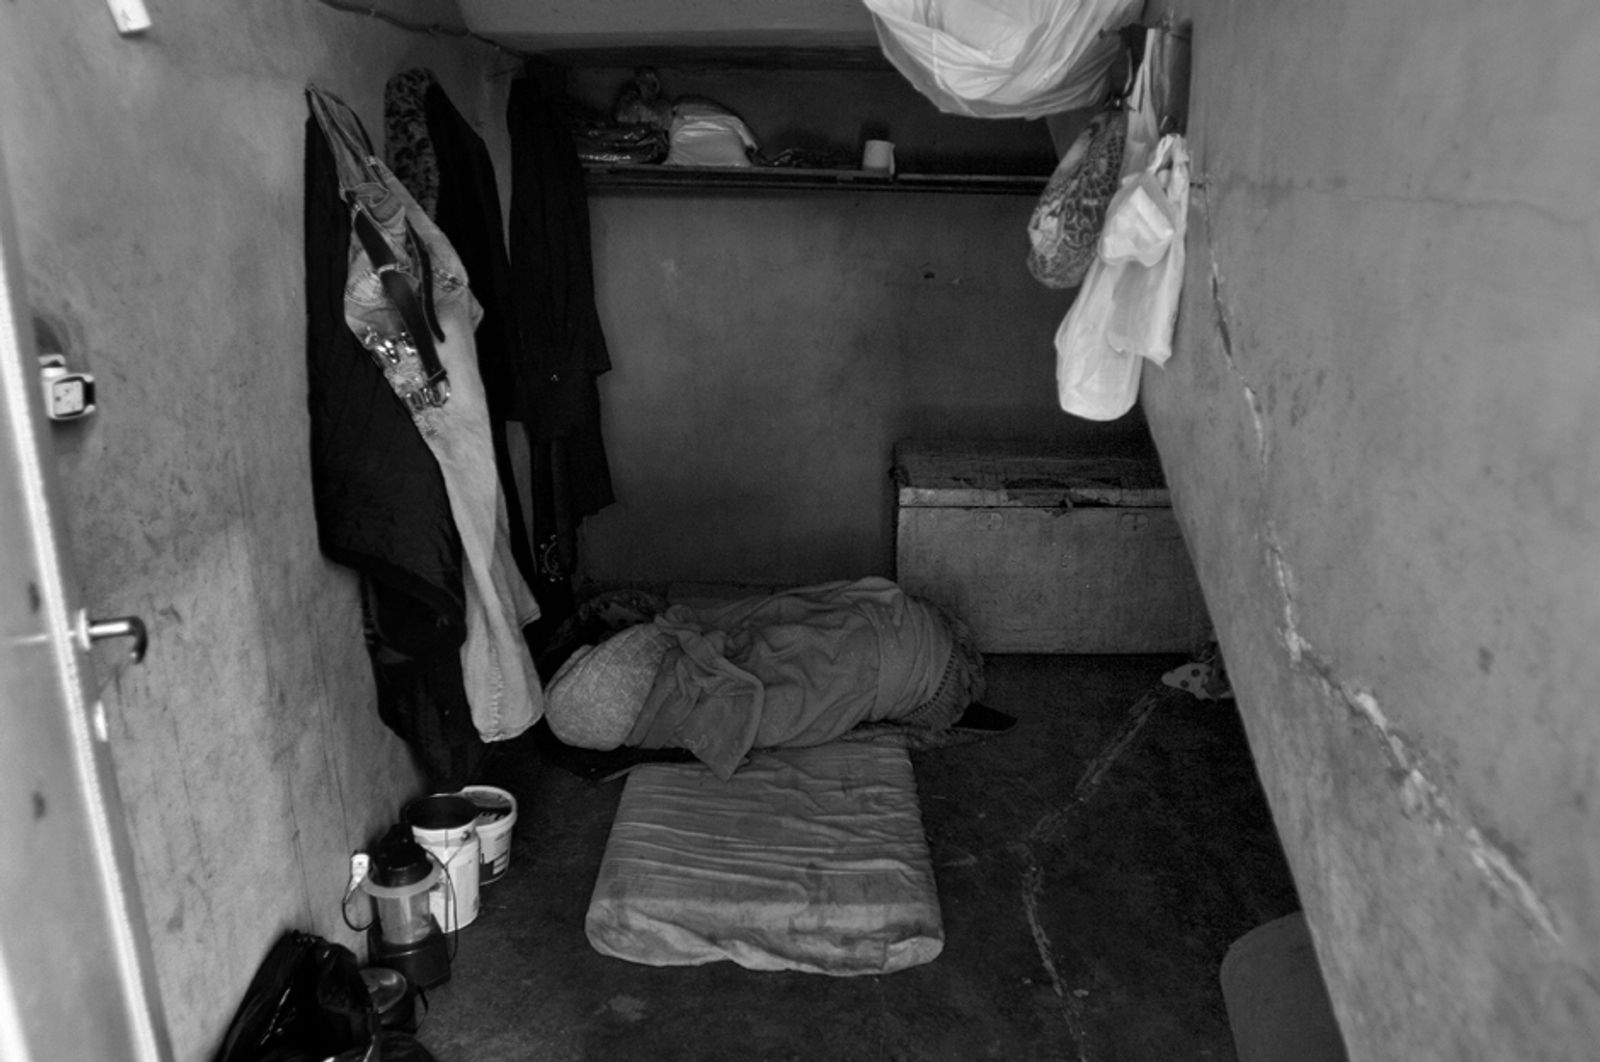 © Stephen Boyle - Sleeping area for a Syrian family who live in a rented garage. Jeb Jennine, Baqaa Valley, Lebanon. February 2014